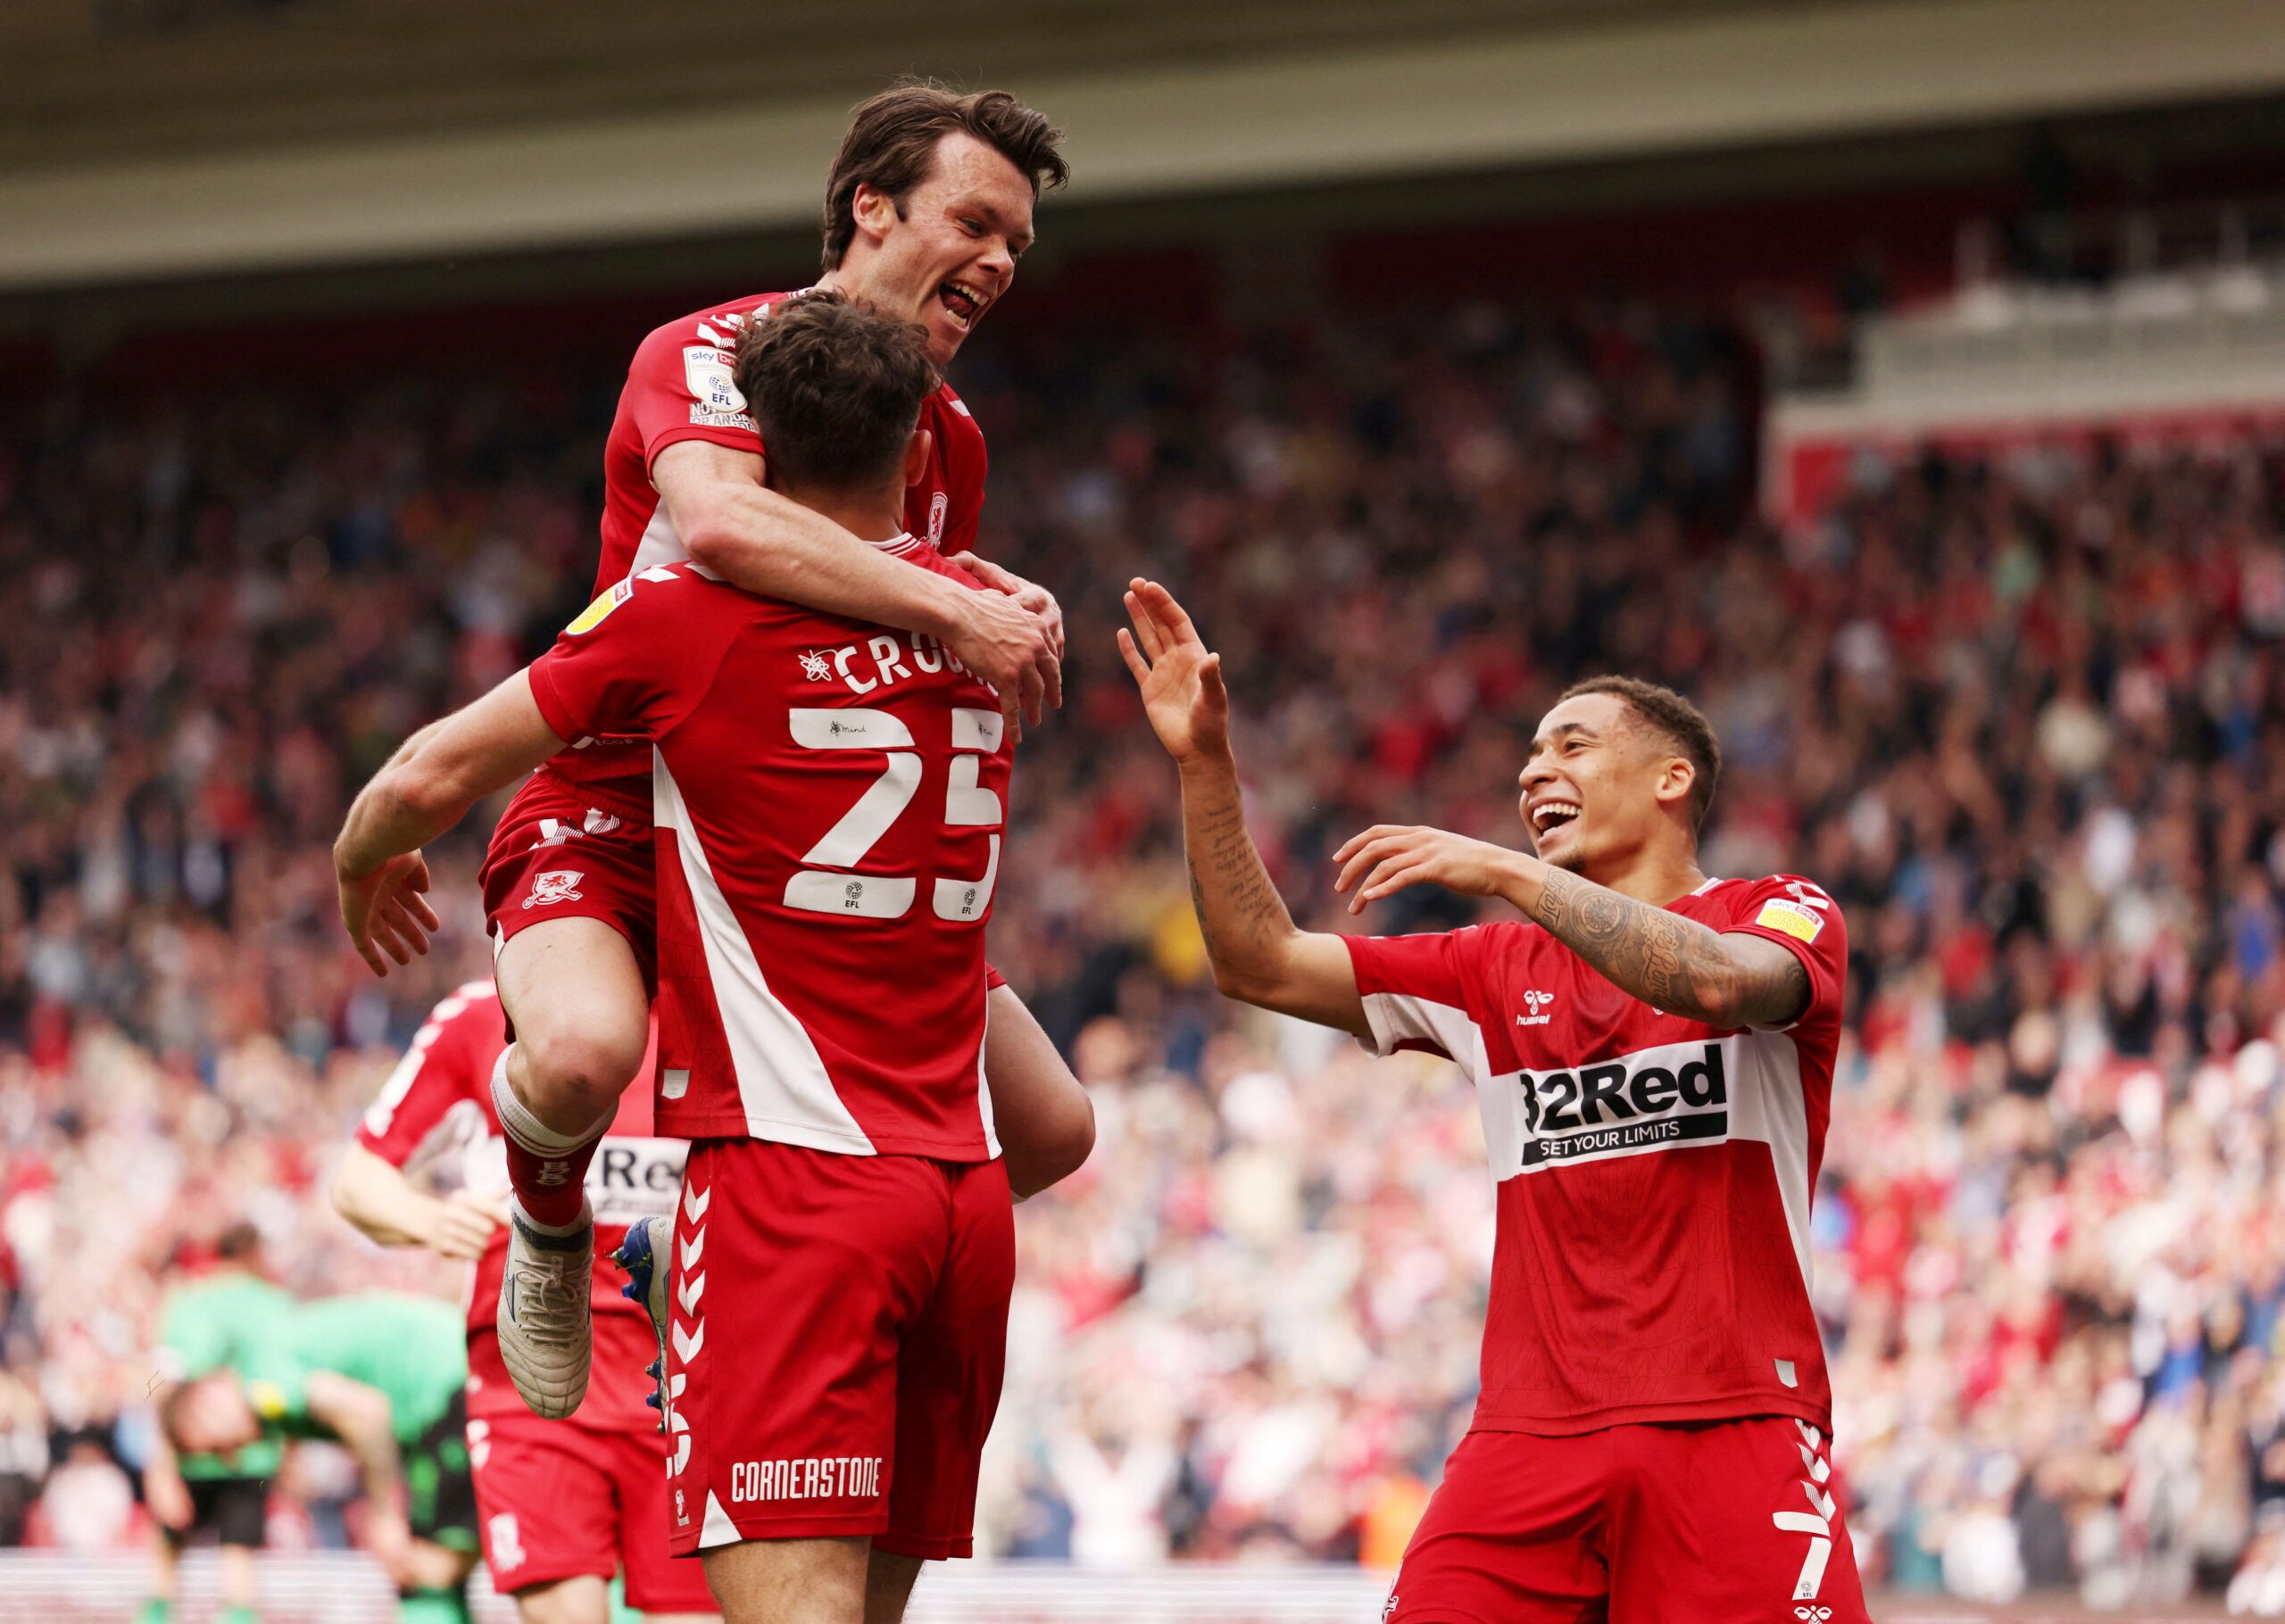 Soccer Football - Championship - Middlesbrough v Stoke City - Riverside Stadium, Middlesbrough, Britain - April 30, 2022 Middlesbrough's Matt Crooks celebrates scoring their first goal with Jonathan Howson  Action Images/John Clifton  EDITORIAL USE ONLY. No use with unauthorized audio, video, data, fixture lists, club/league logos or 